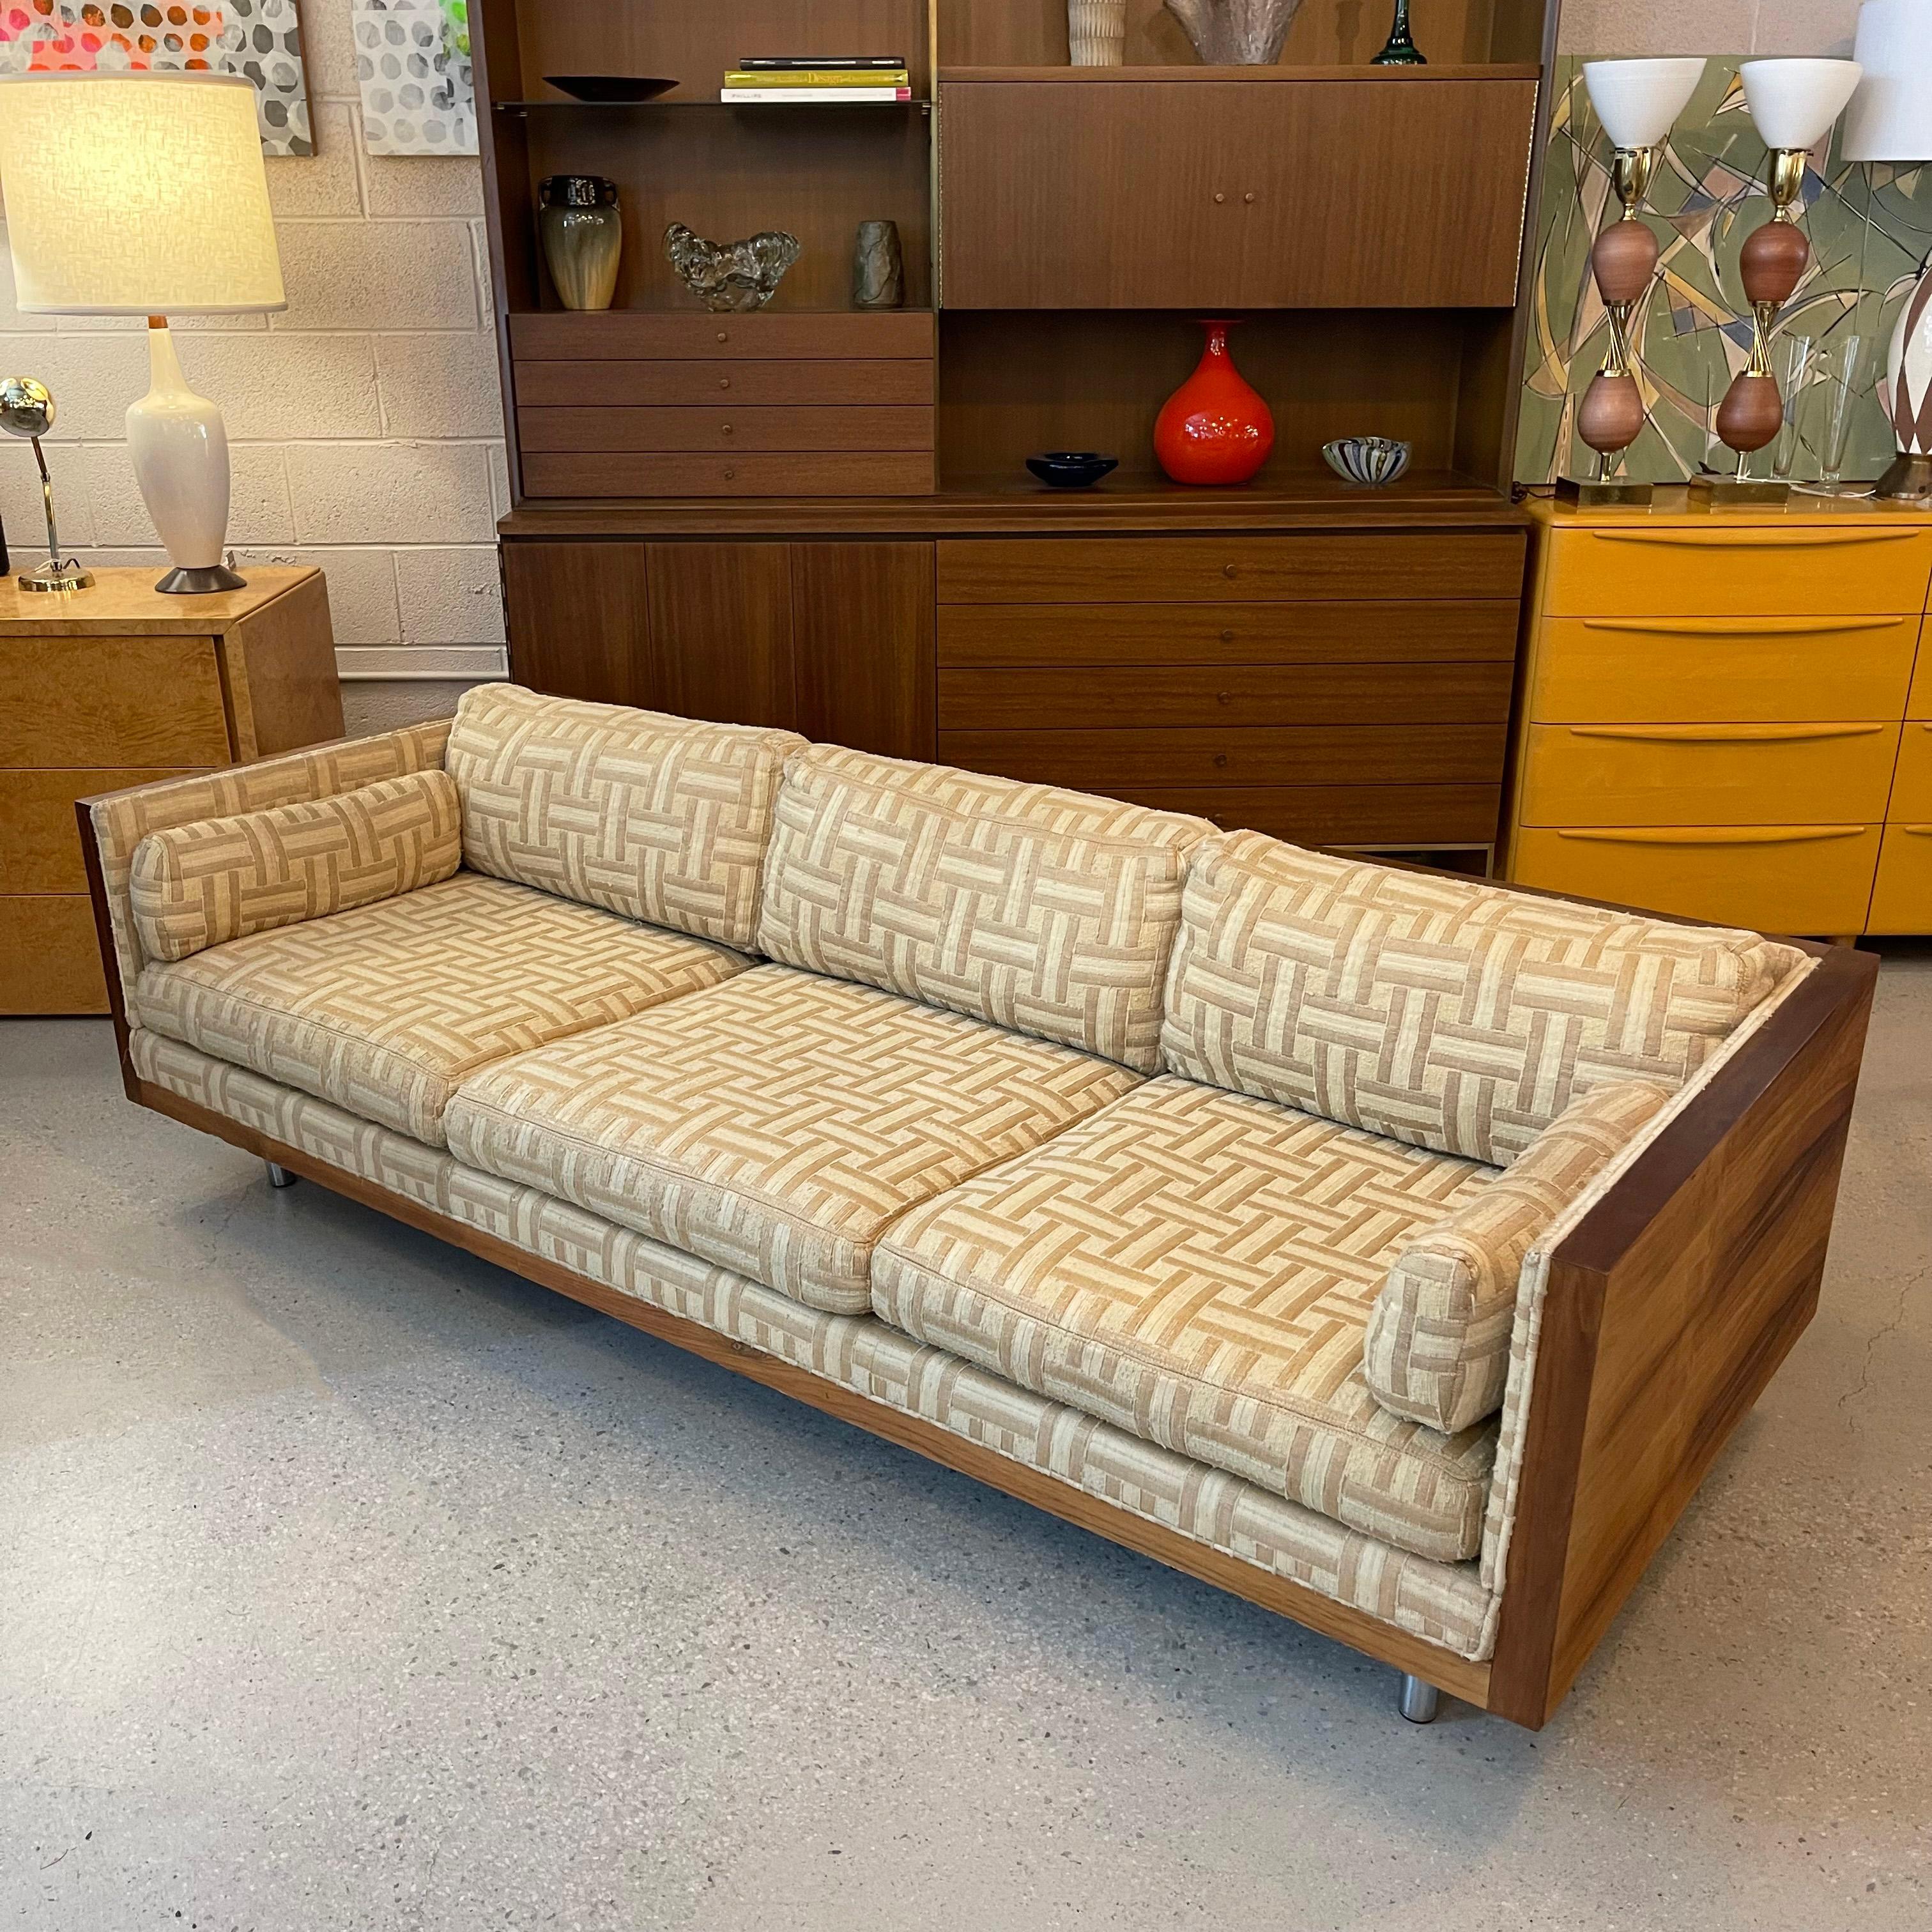 Sleek, low-profile, mid-century modern, rosewood case sofa by Milo Baughman for Thayer Coggin features a beautifully grained rosewood surround with tubular chrome legs and nubby, raw linen upholstery with neutral lattice pattern that is soft to the